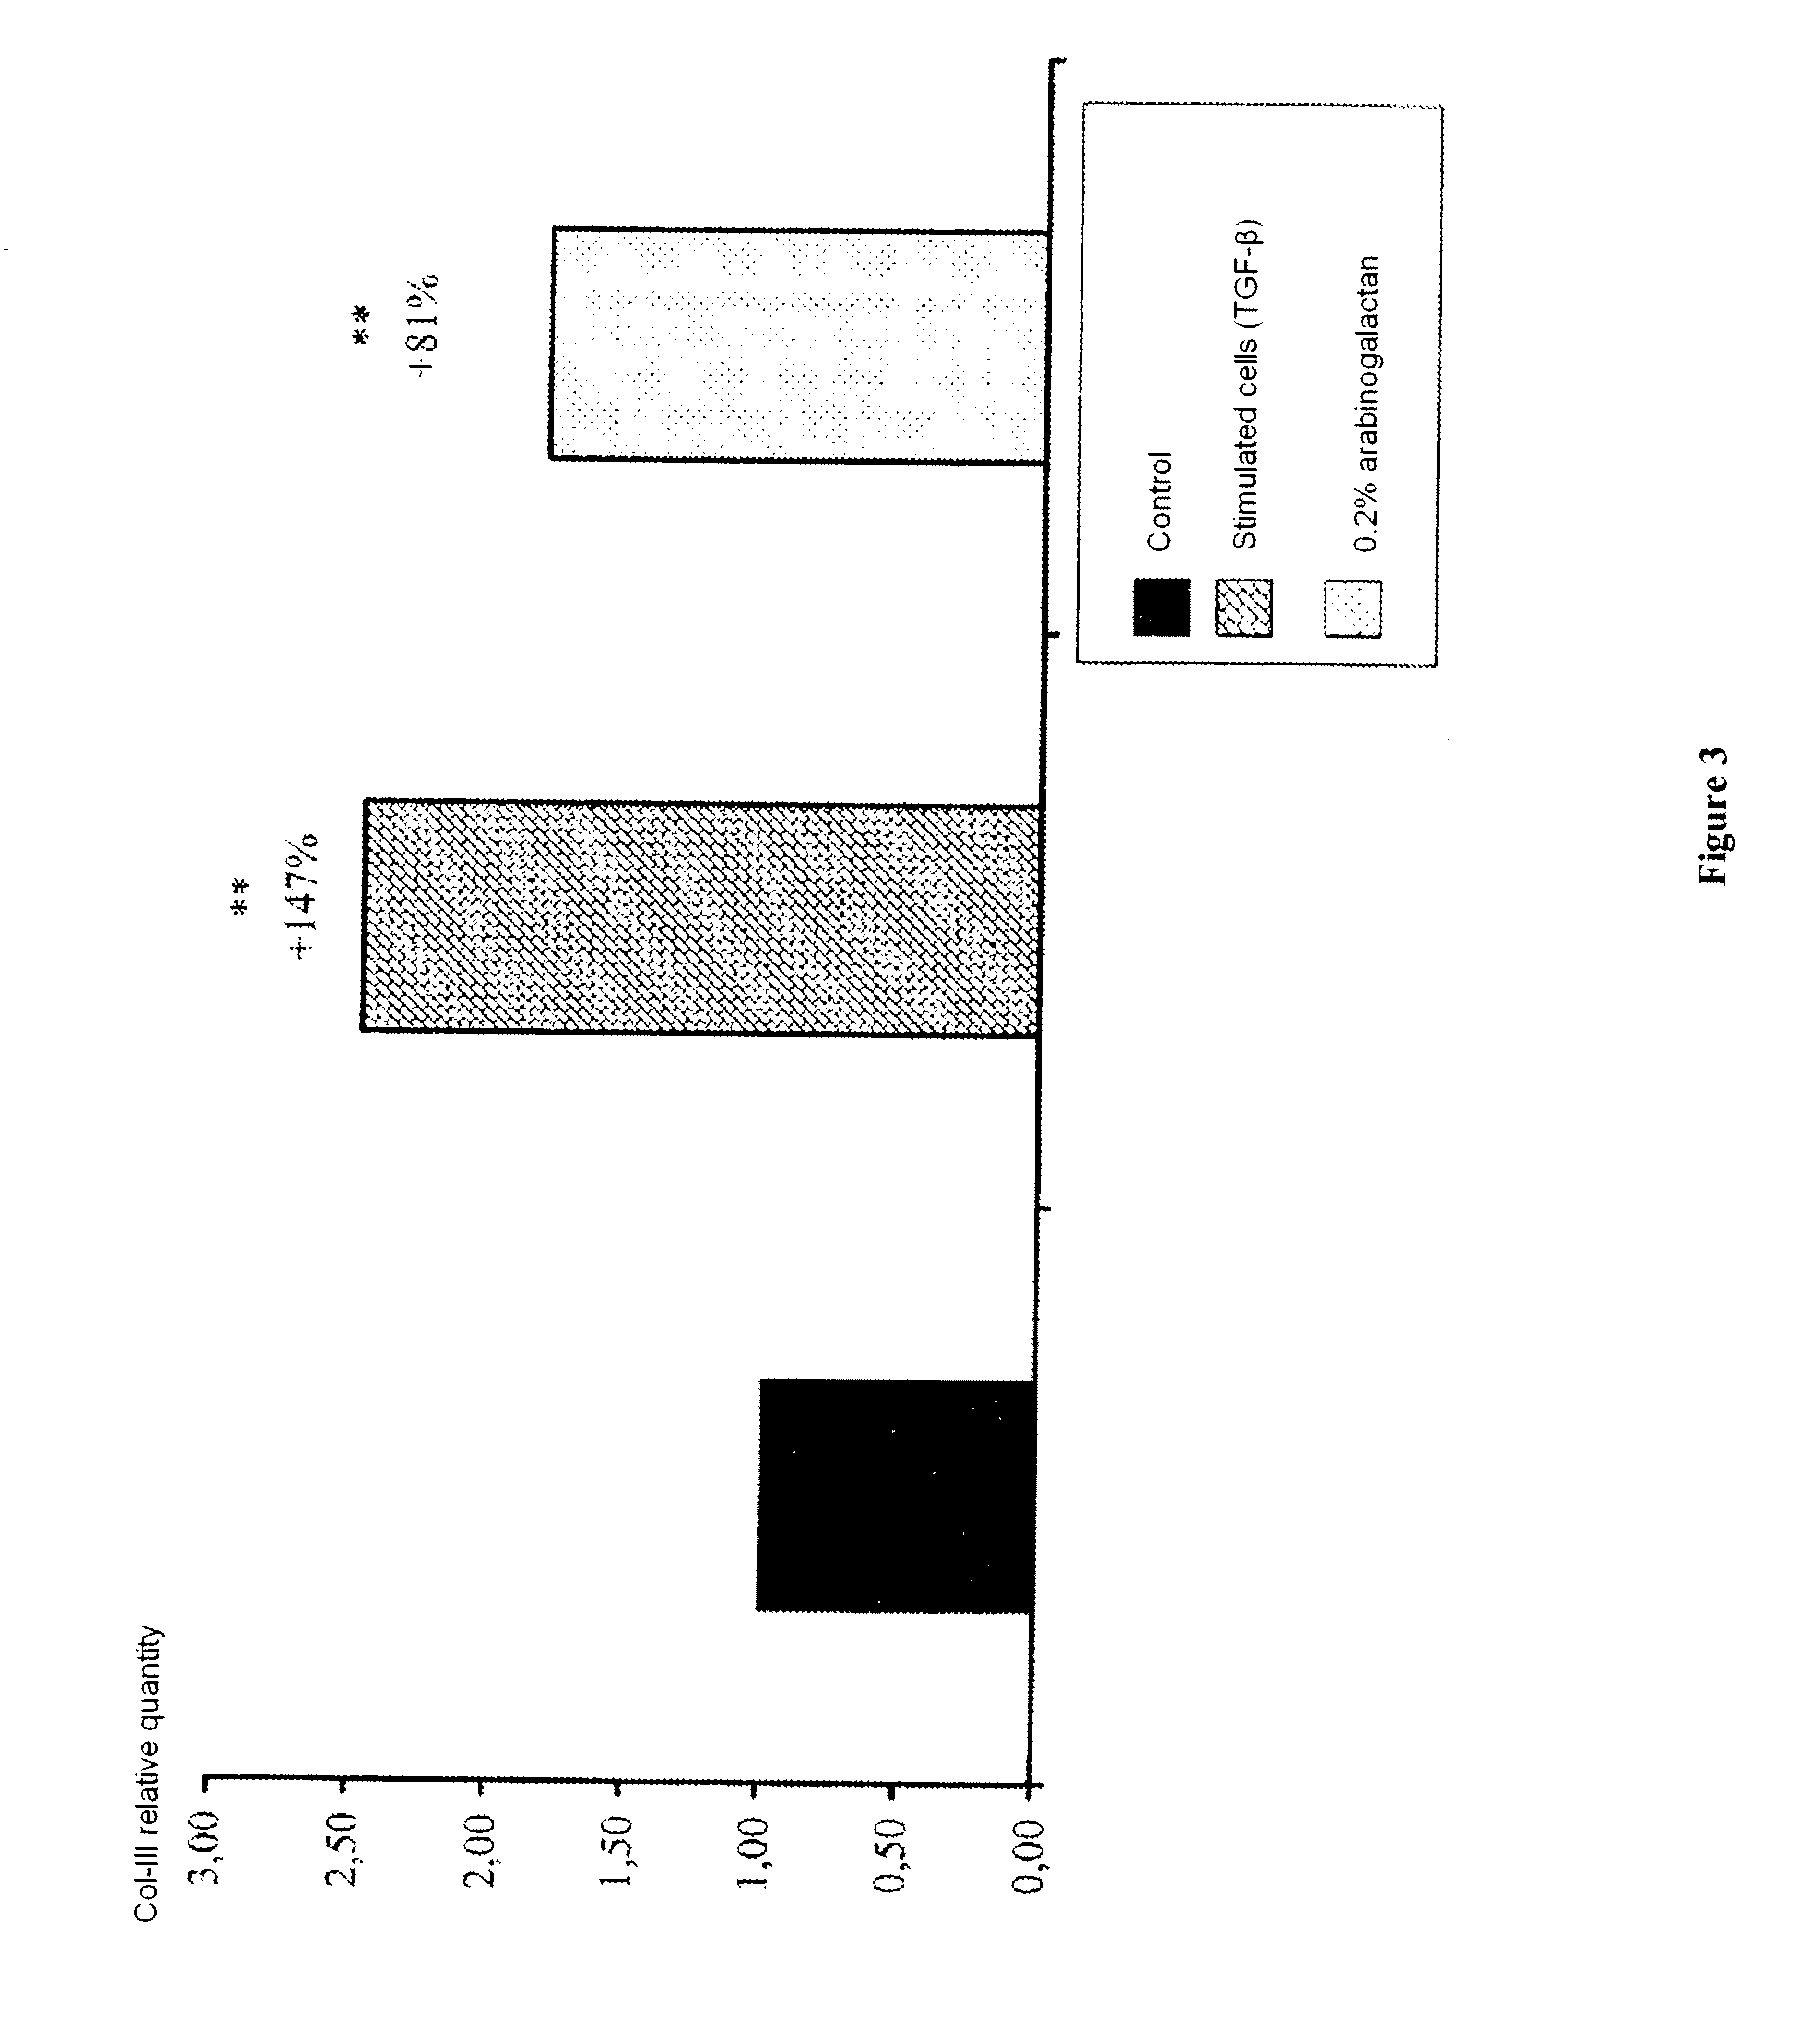 Novel Anti-stretch mark active agent, and compositions containing same